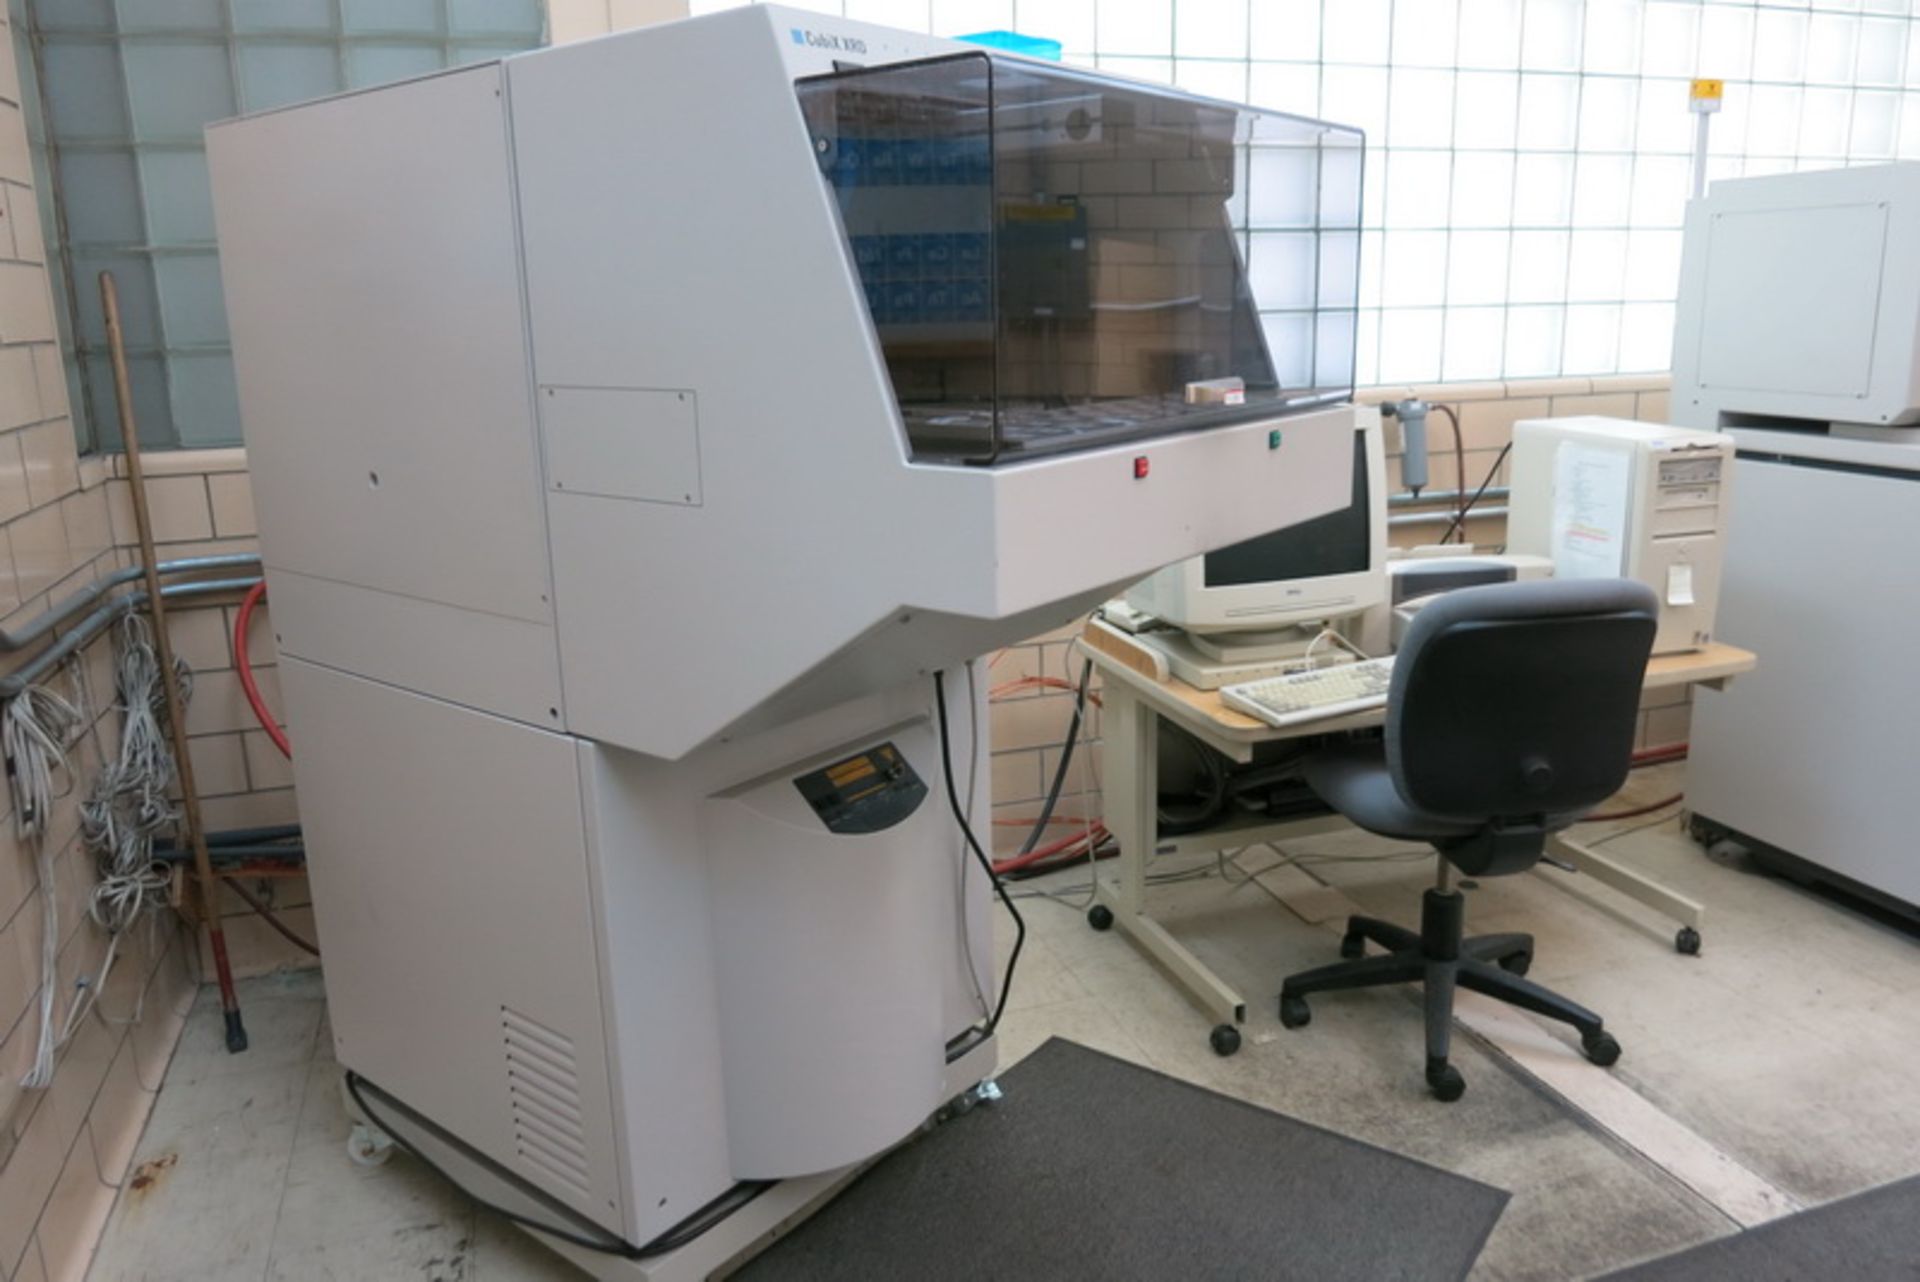 Philips analytical x-ray, model Cubix XRD, s/n DY1008, with computer and printer